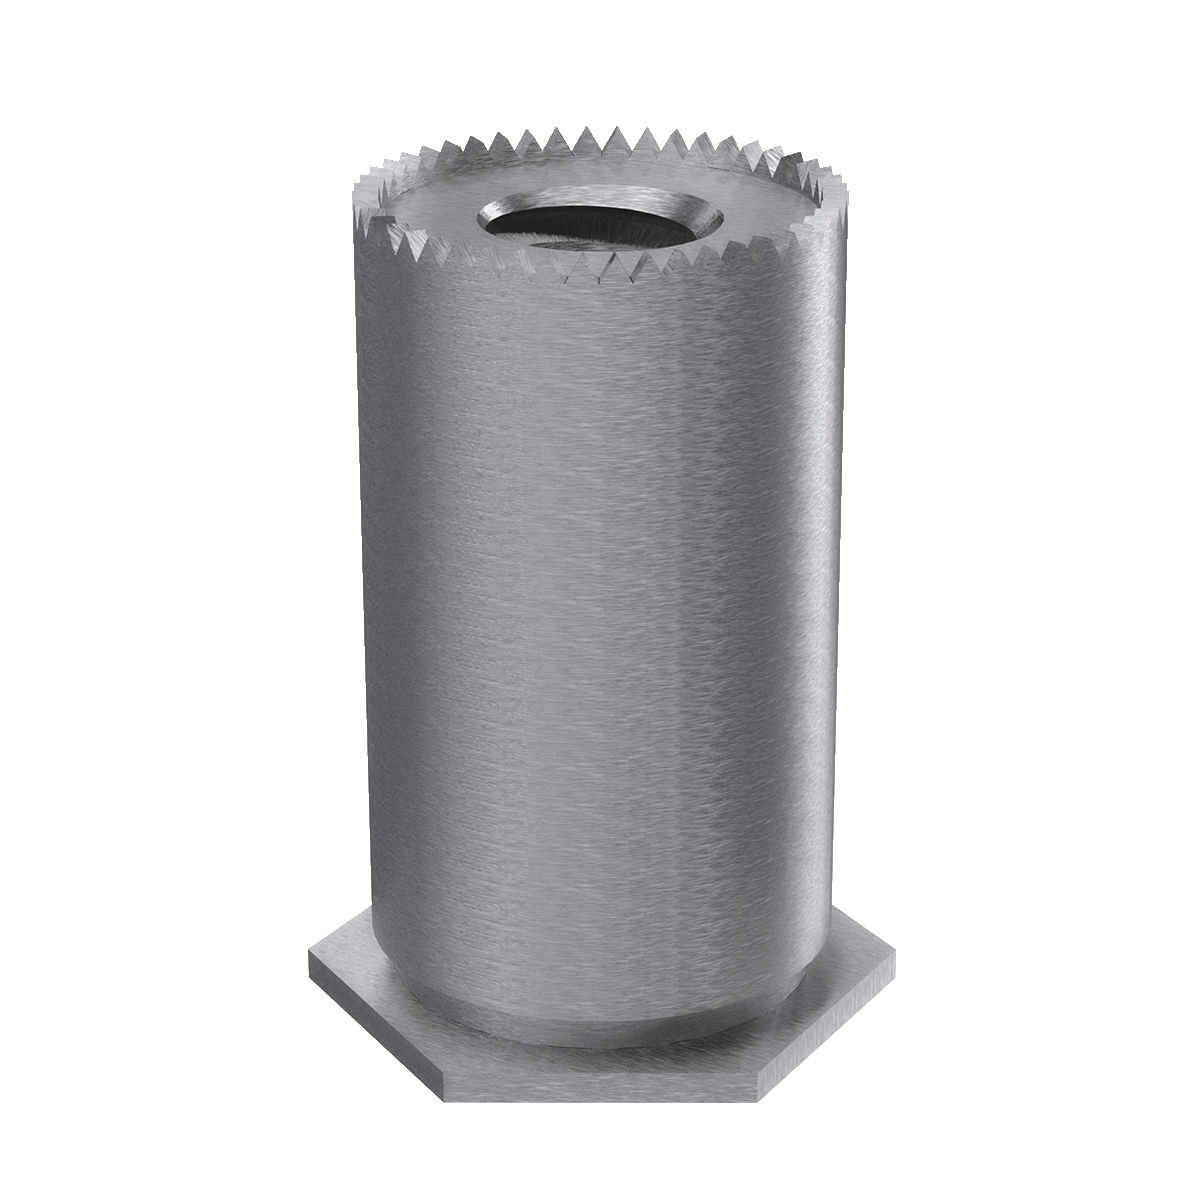 Self-Clinching Standoff, Self-Grounding, 300 Series Stainless Steel, Passivated, M3x0.5 x 14, 100 Pack